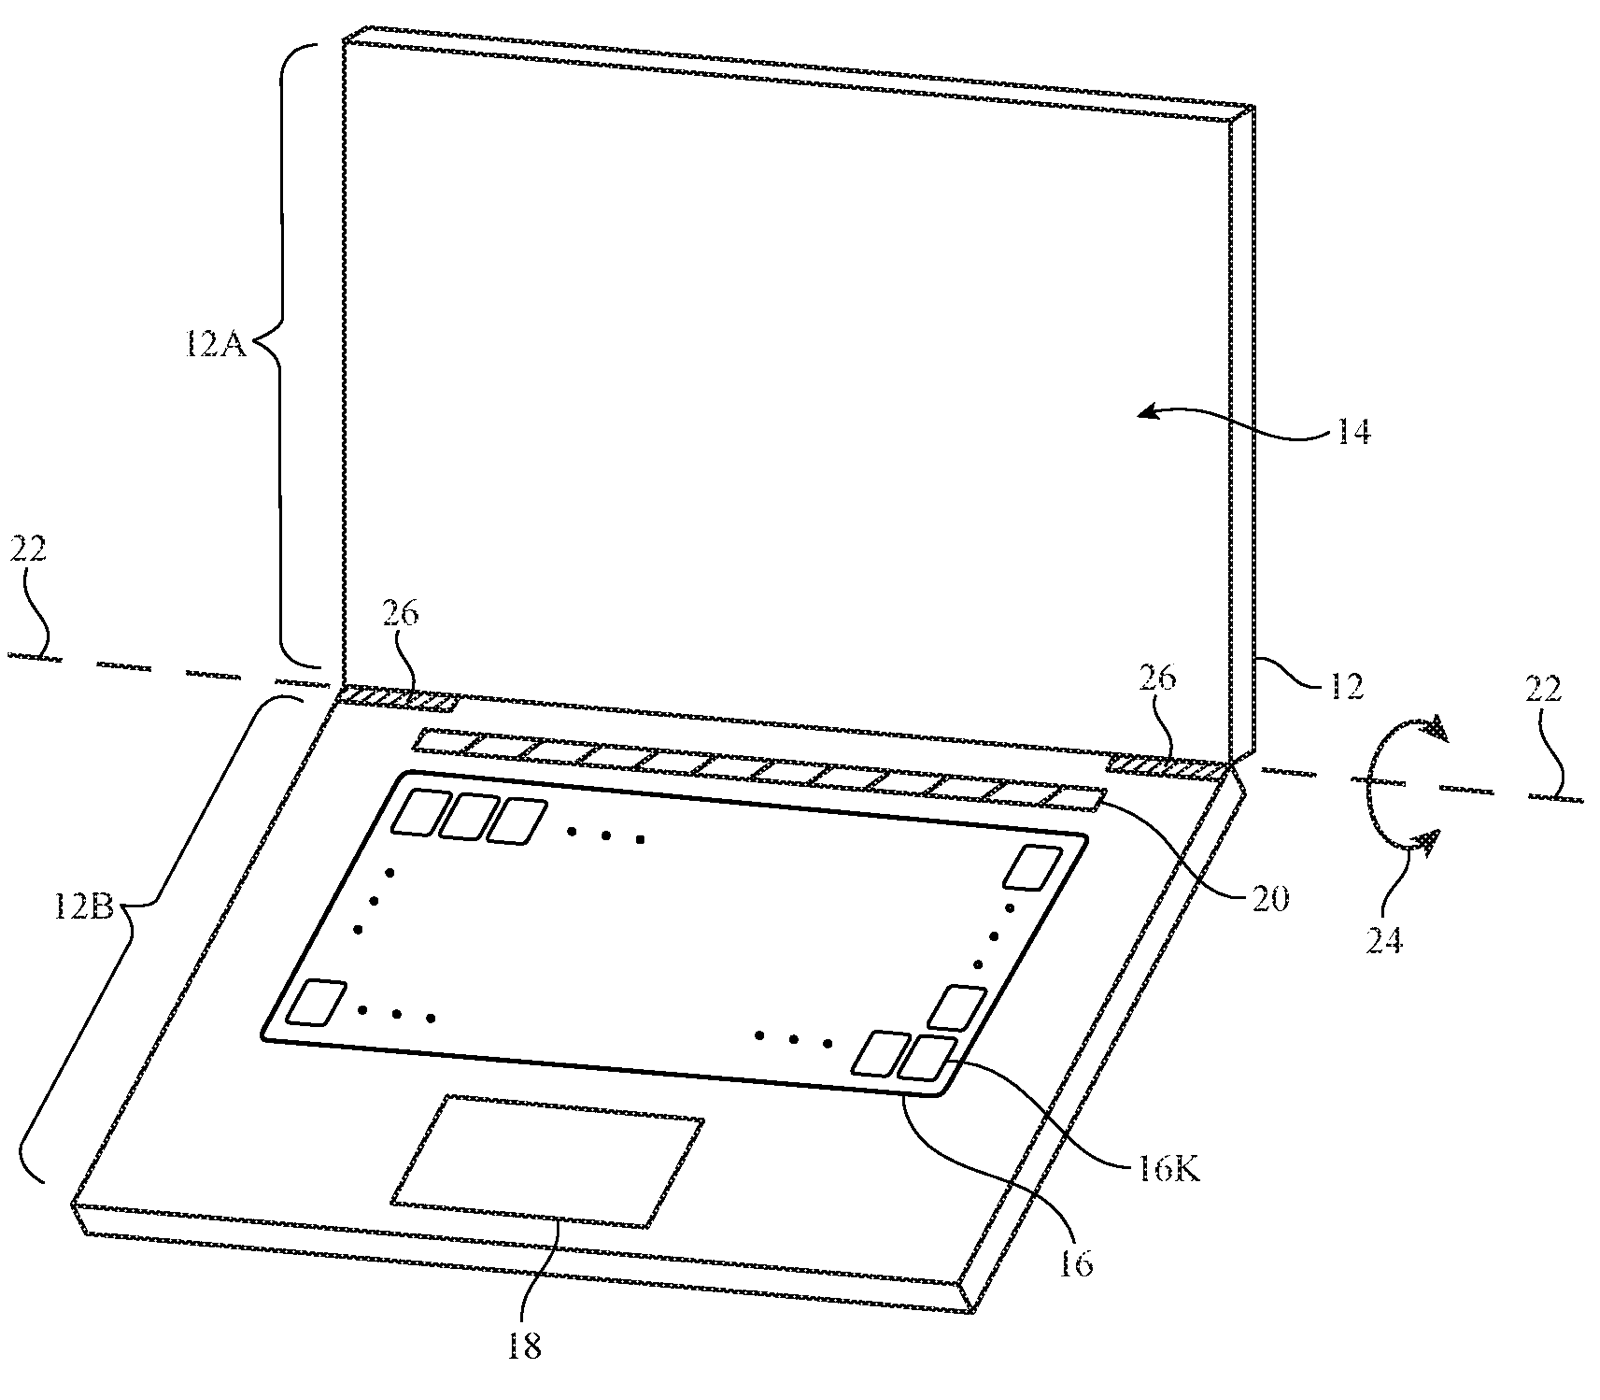 An illustration accompanying Apple's patent for "Electronic devices having keys with coherent fiber bundles" that shows a reconfigurable notebook keyboard